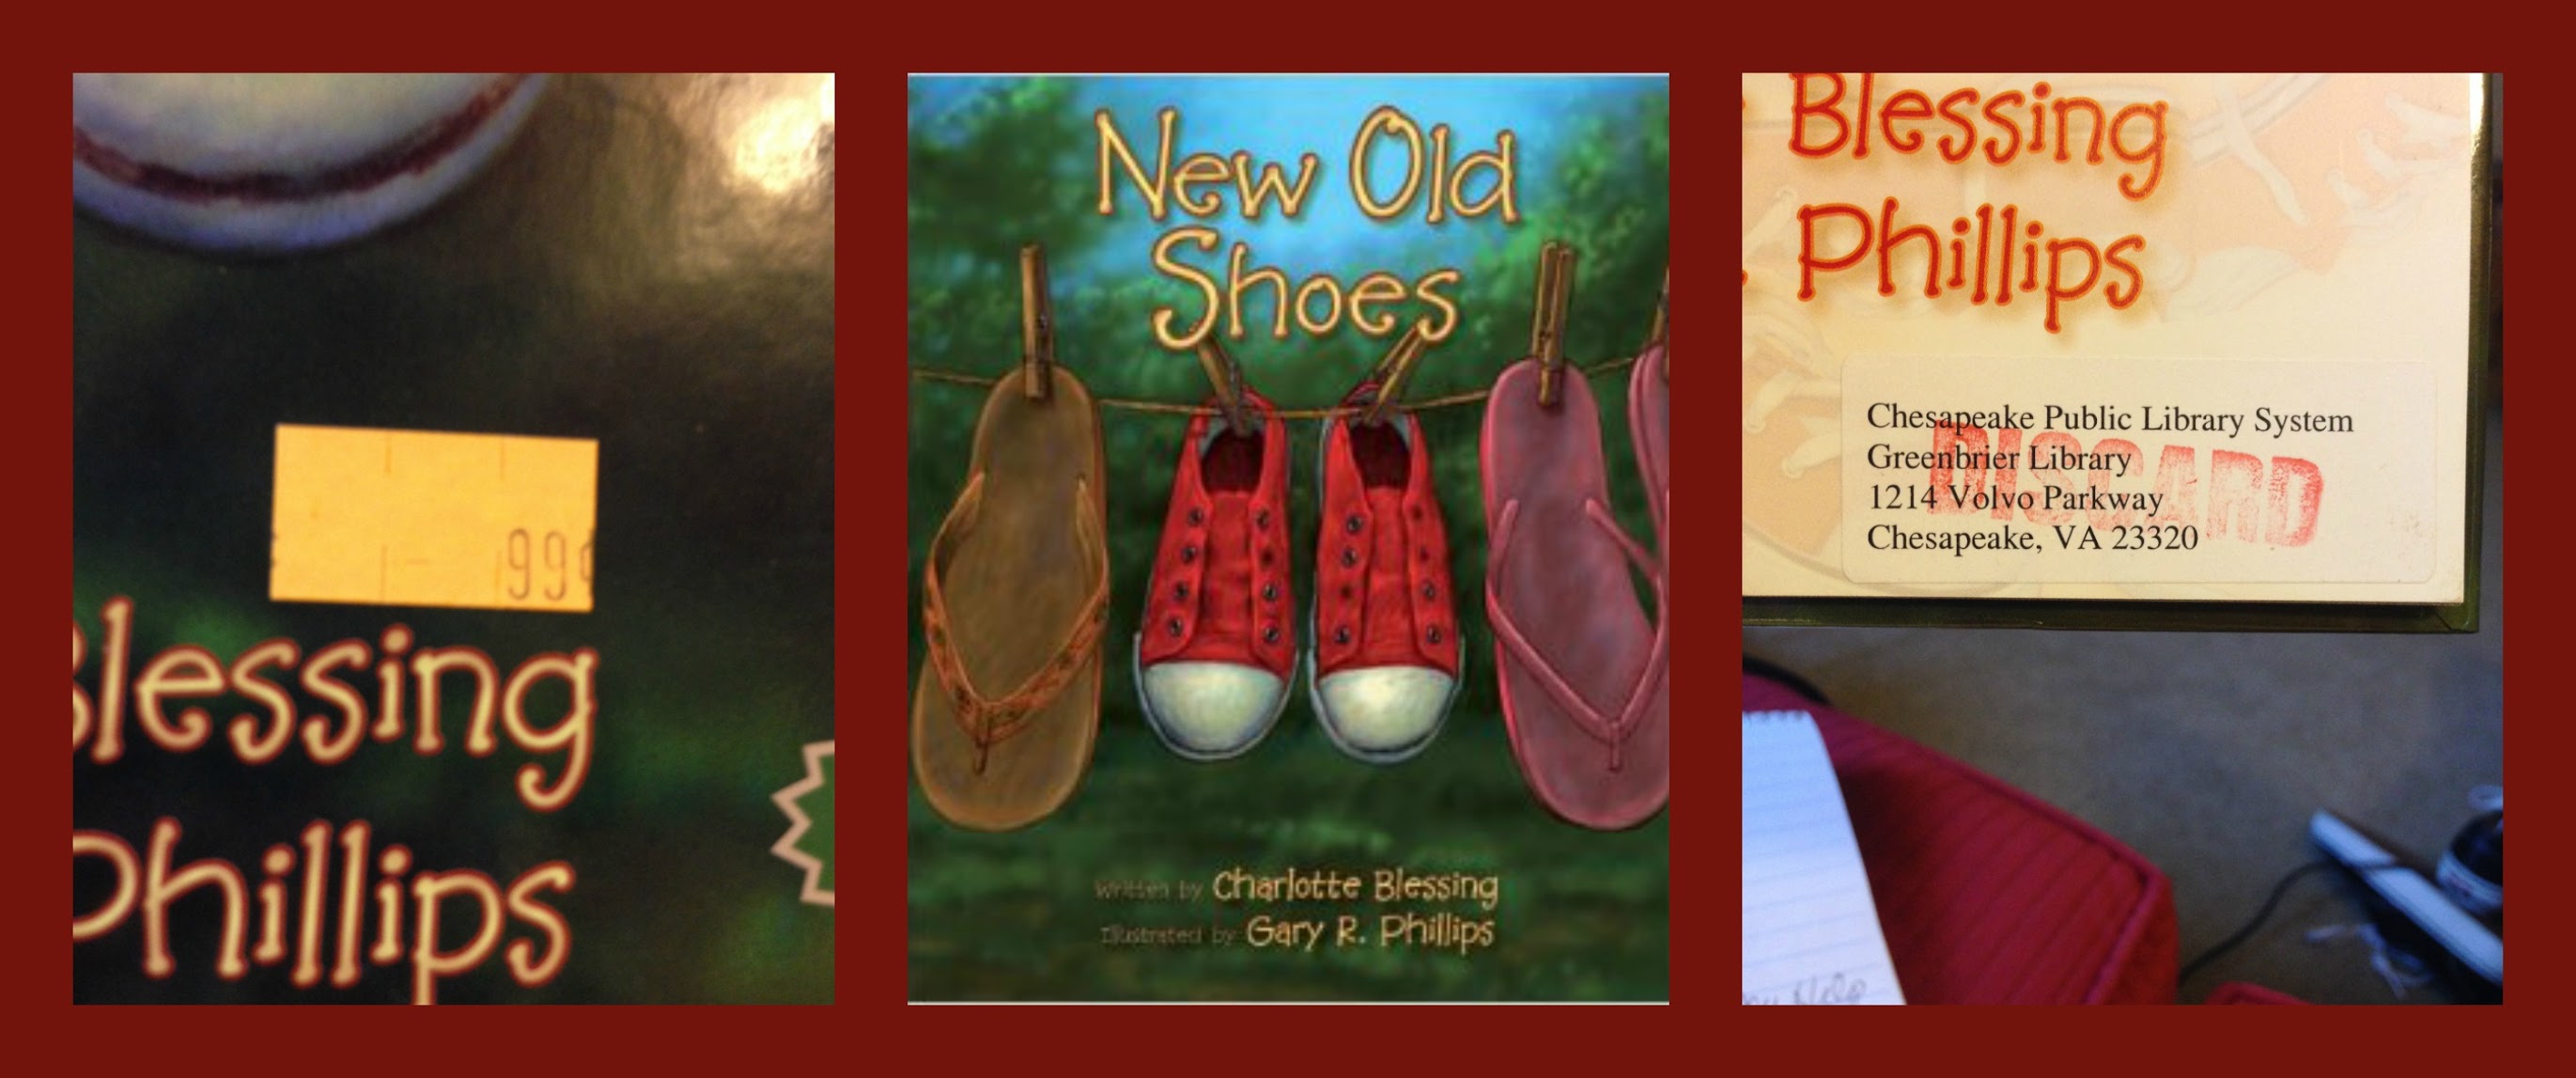 4 Ideas Inspired by "New Old Shoes" - Matching Literacy to Recycling